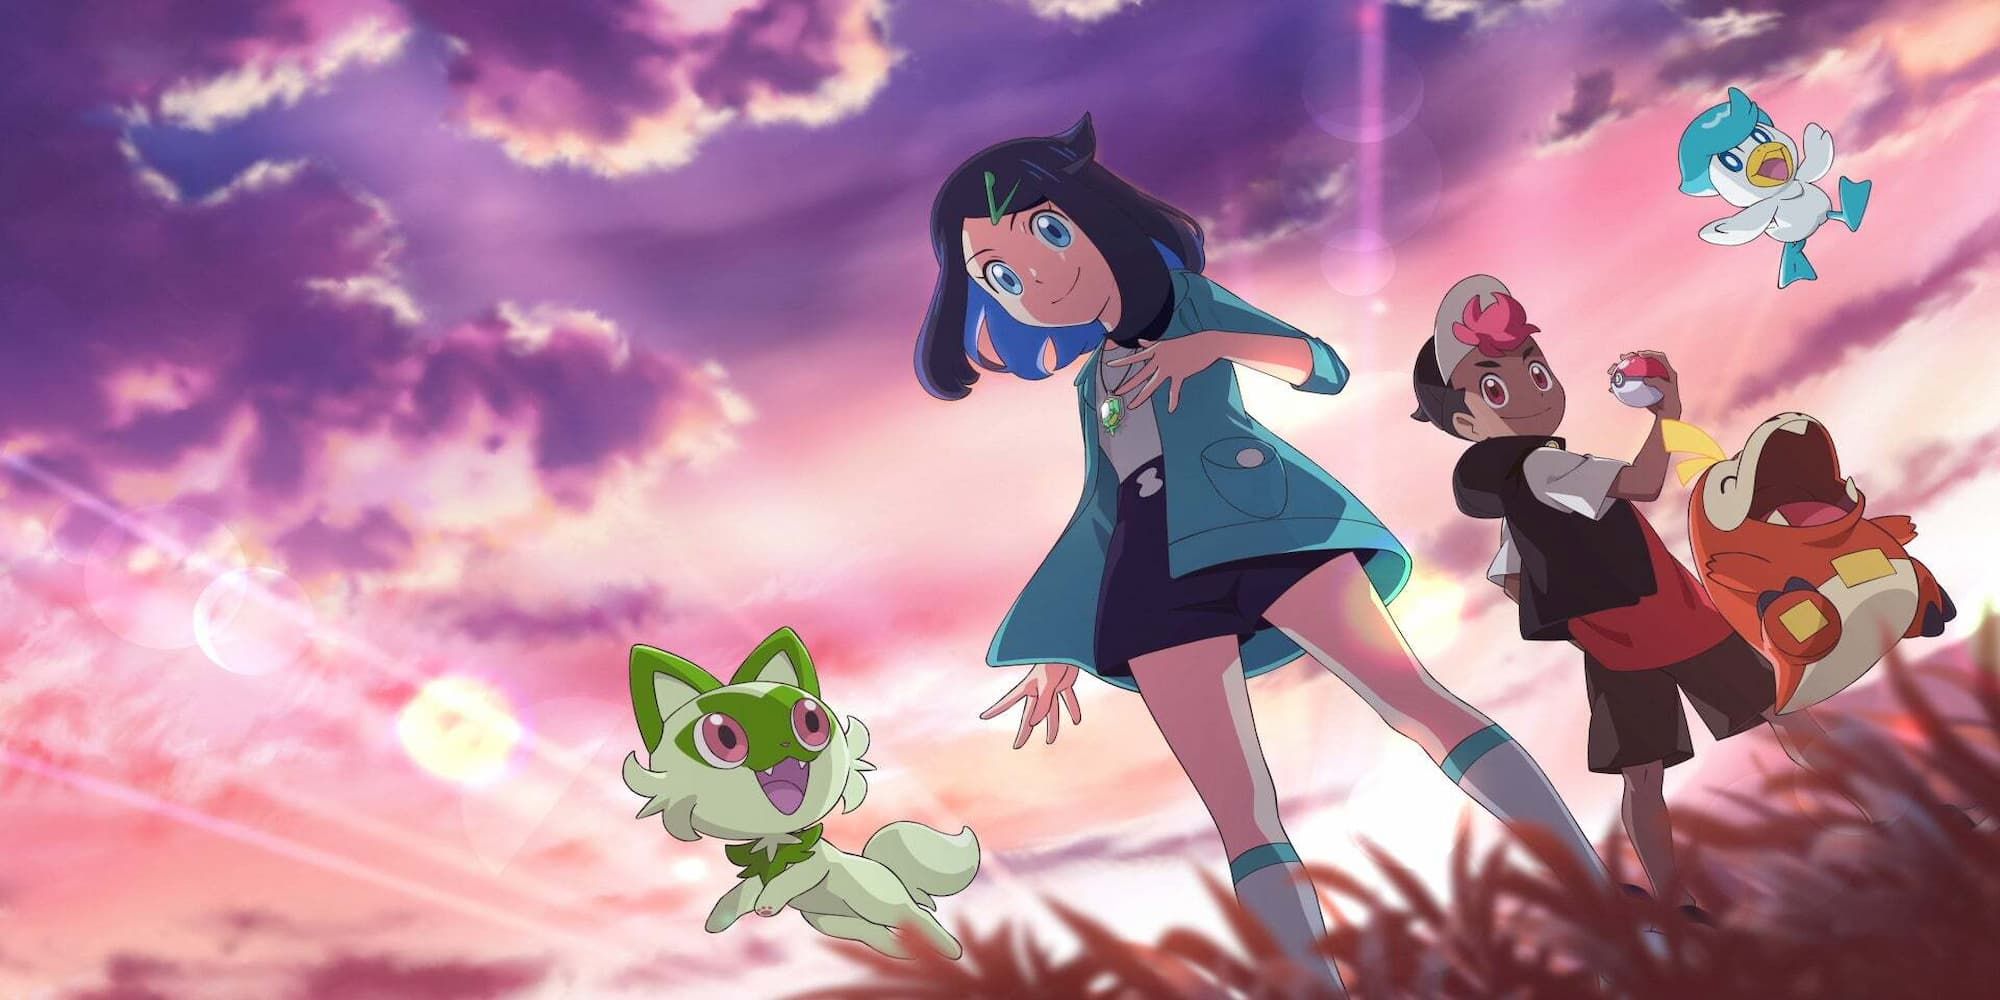 New Pokemon Anime Series Announced With Two New Characters